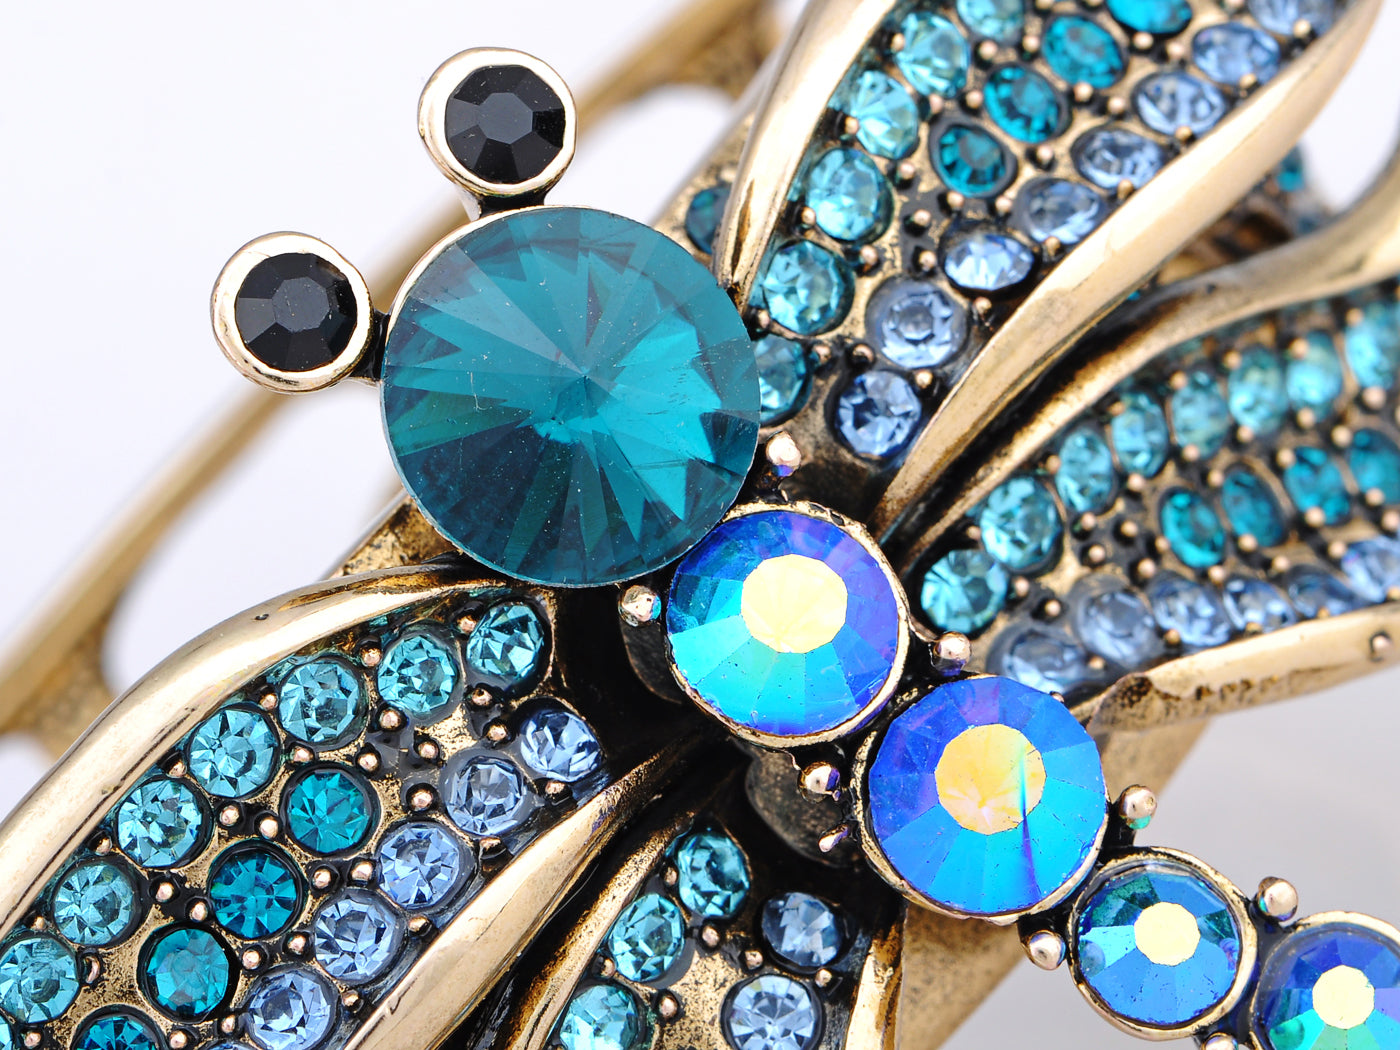 Electrifying Blue Zircon Dragonfly Over A Gold Cuff Bracelet